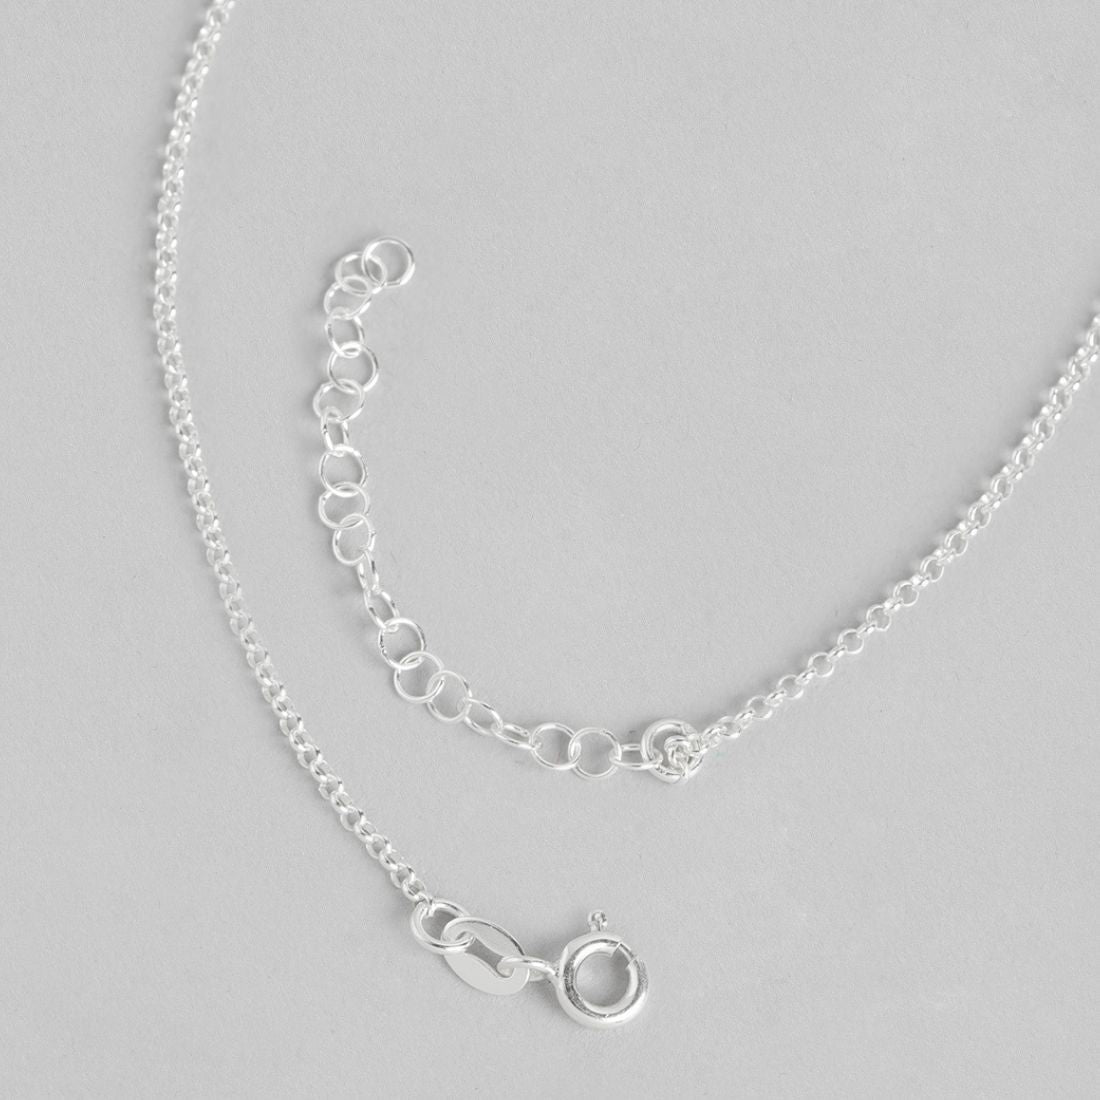 Infinity-MOM Rhodium Plated 925 Sterling Silver Necklace